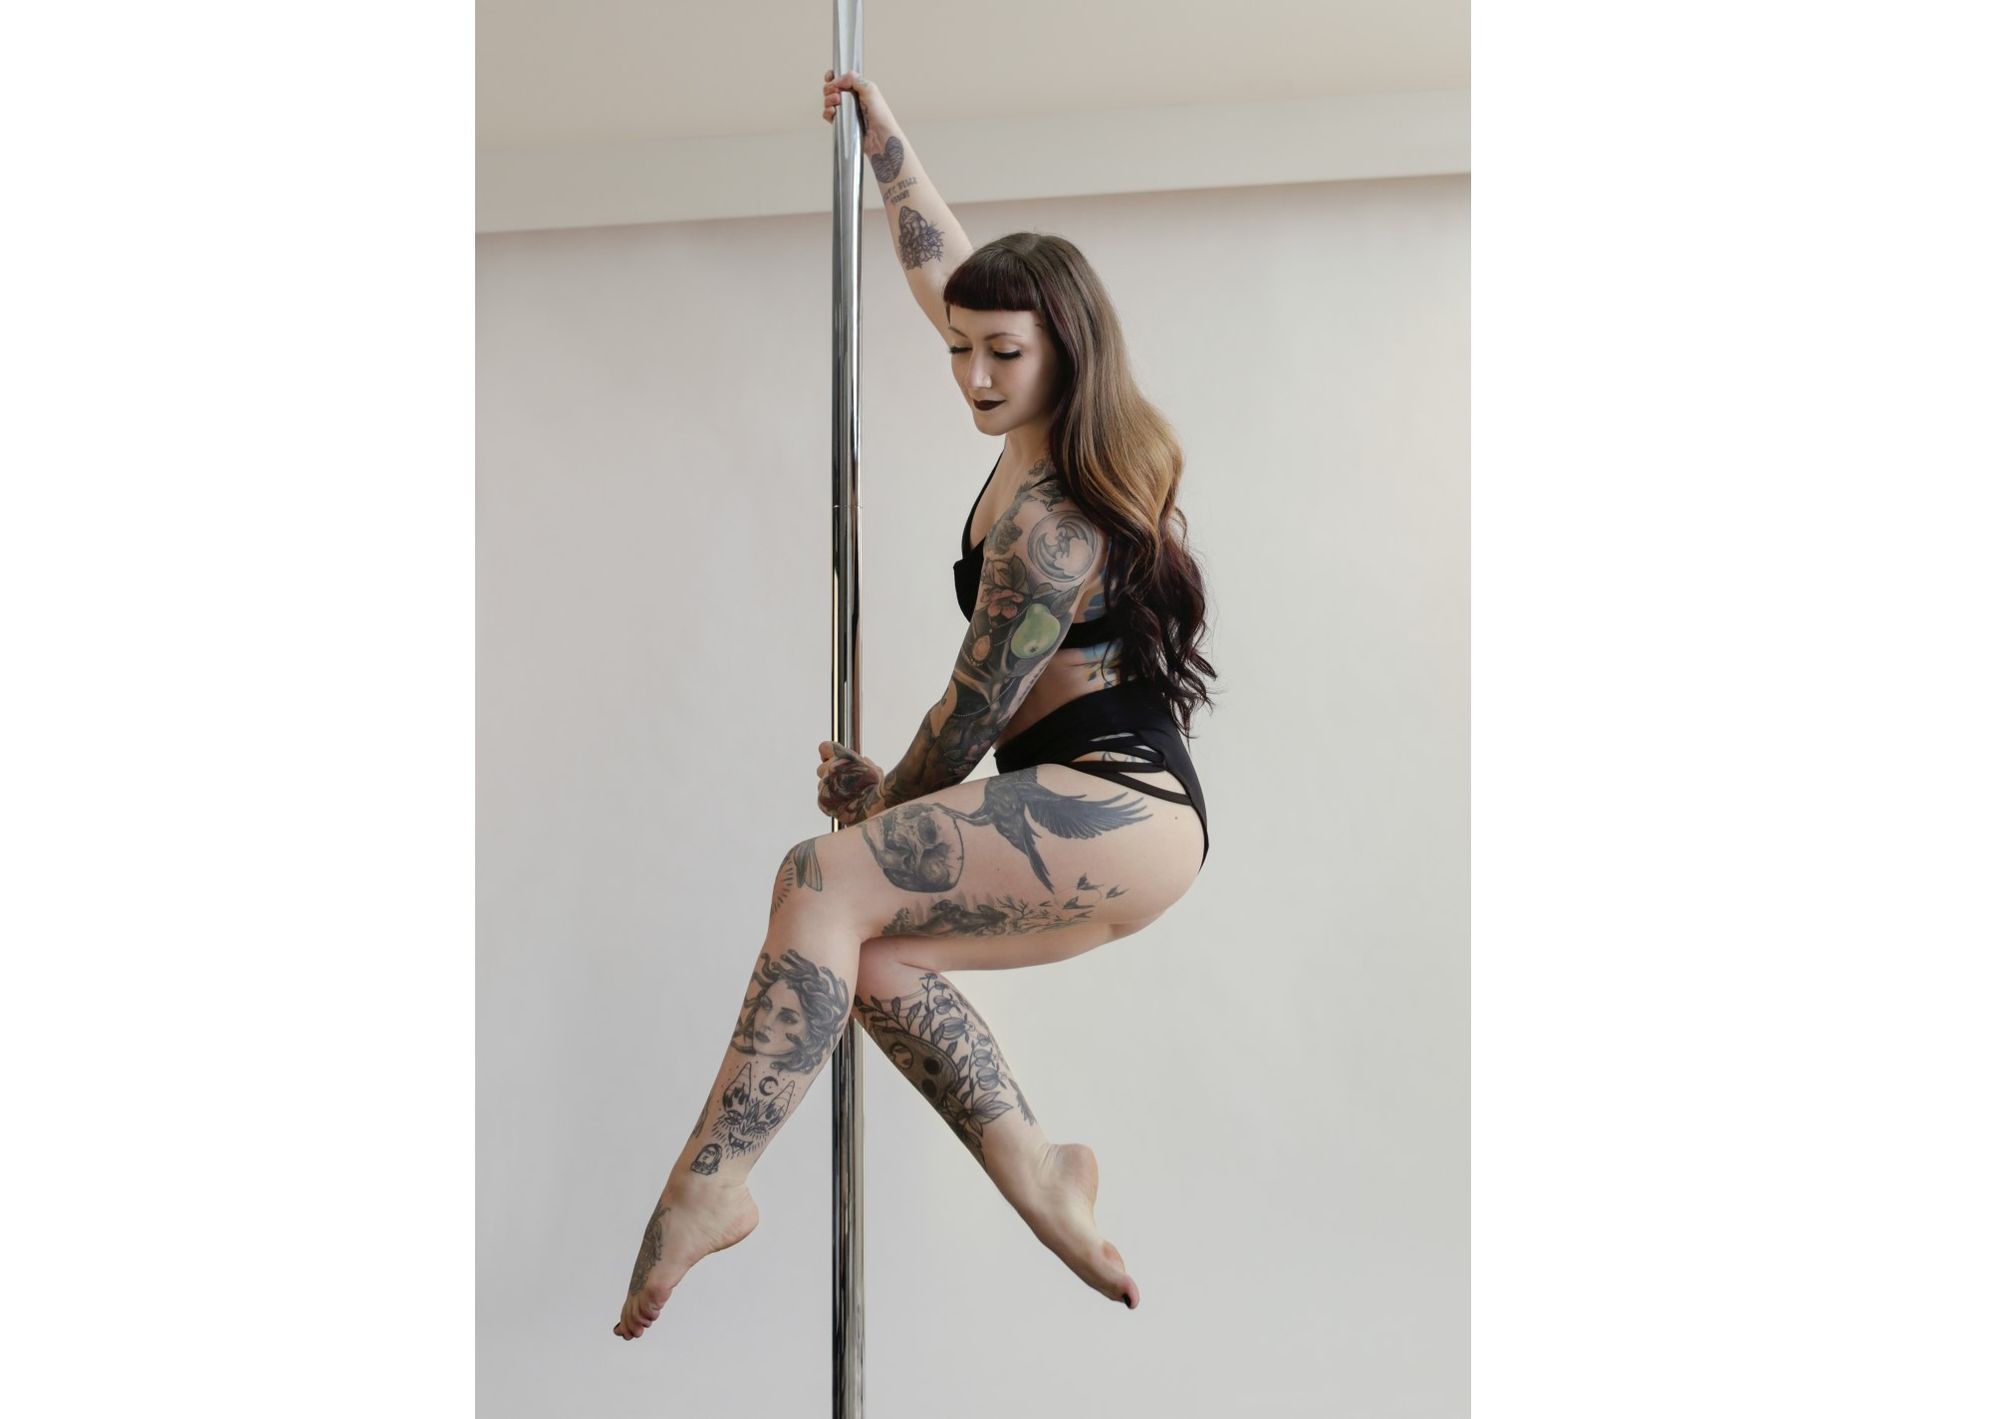 Inspire, Motivate and Empower - Pole Fitness Academy